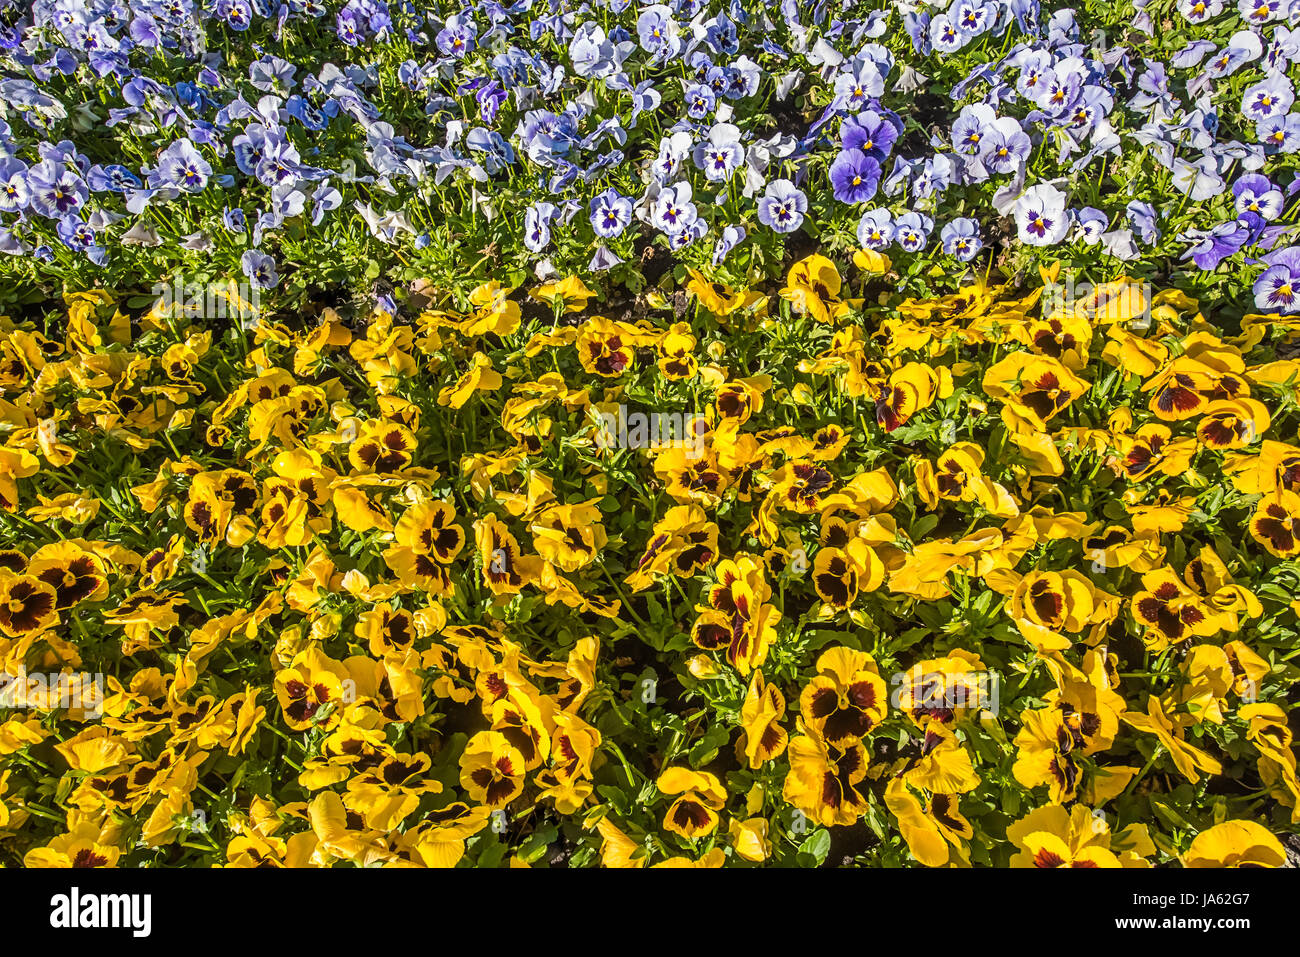 Top view of colourful horizontal flowerbed made of blue and yellow pansies in sunshine Stock Photo